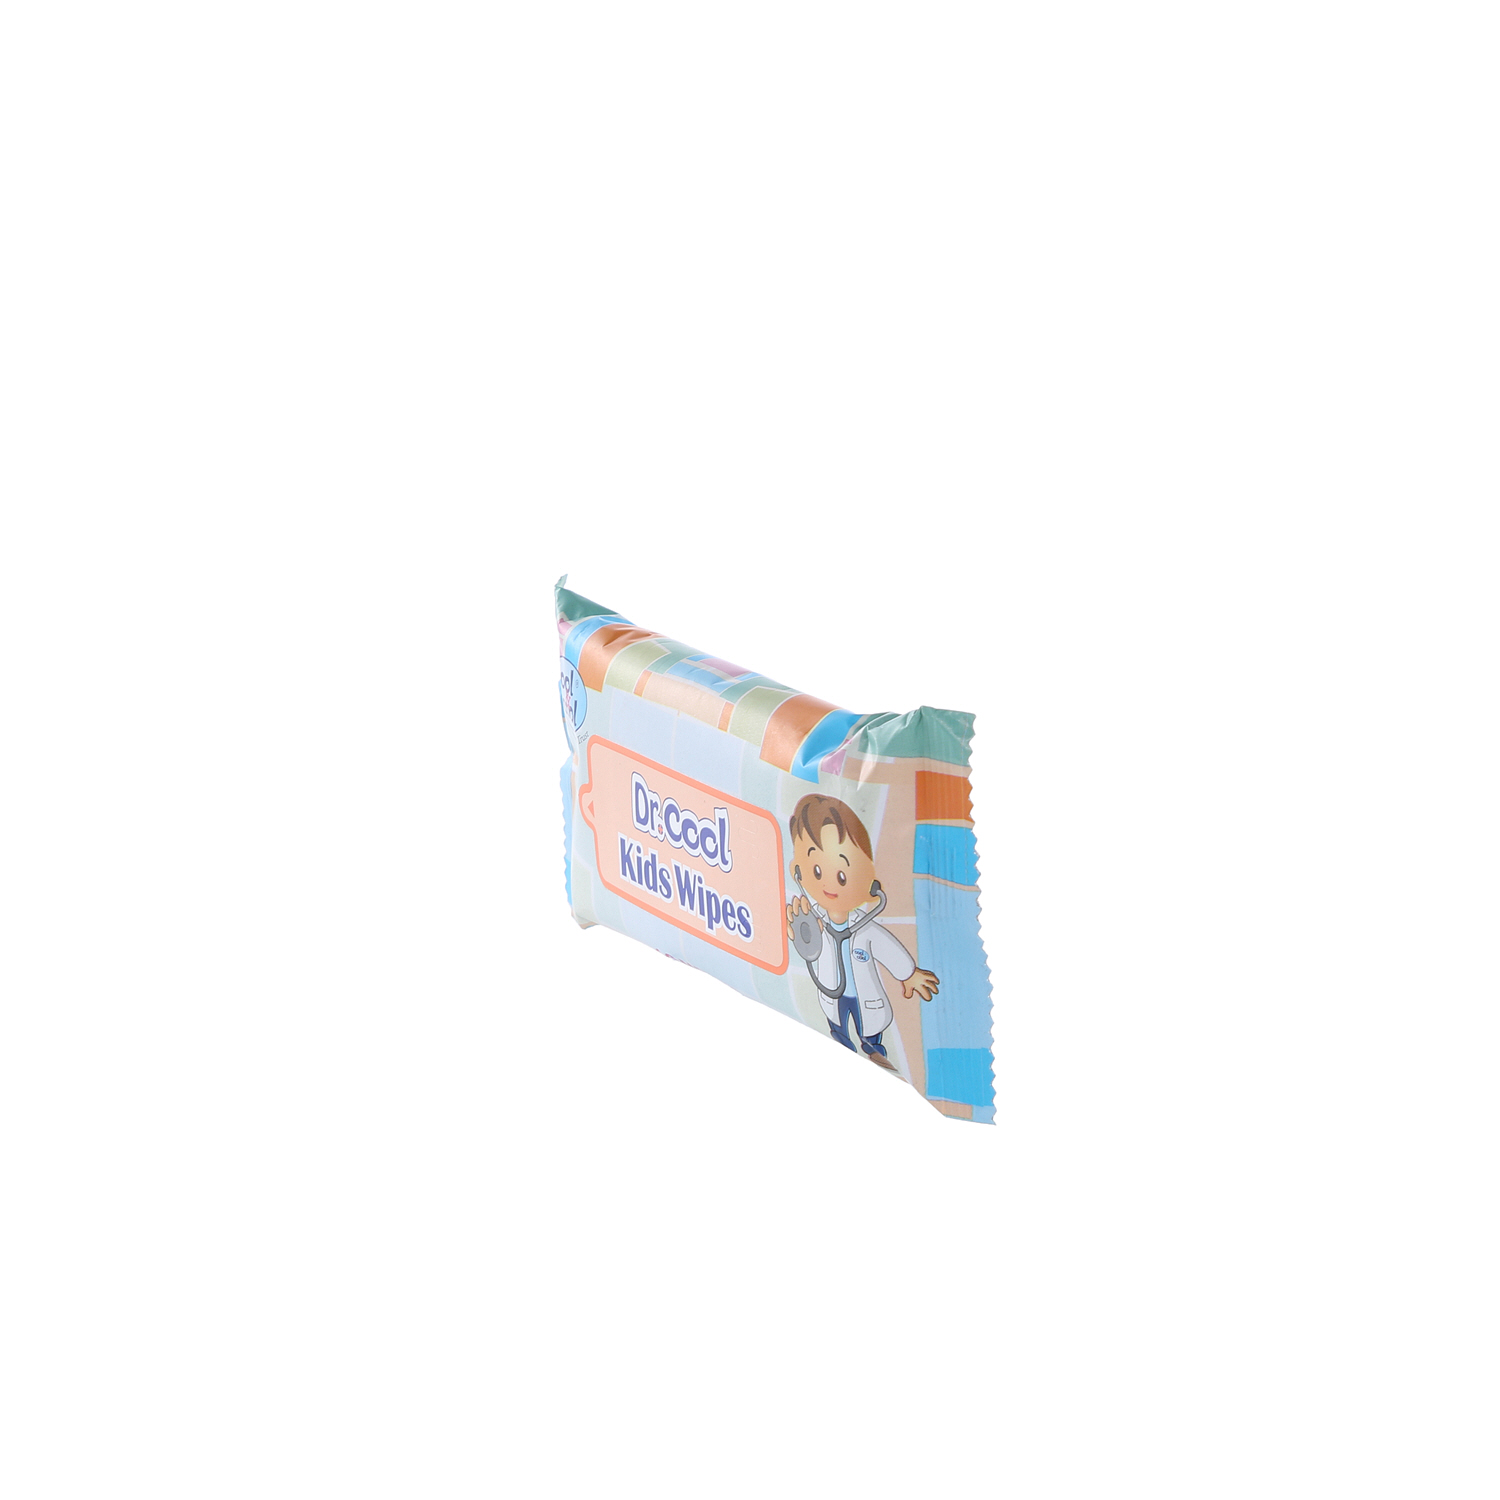 Cool & Cool Dr.Cool Kids Wipes 10 Wipes